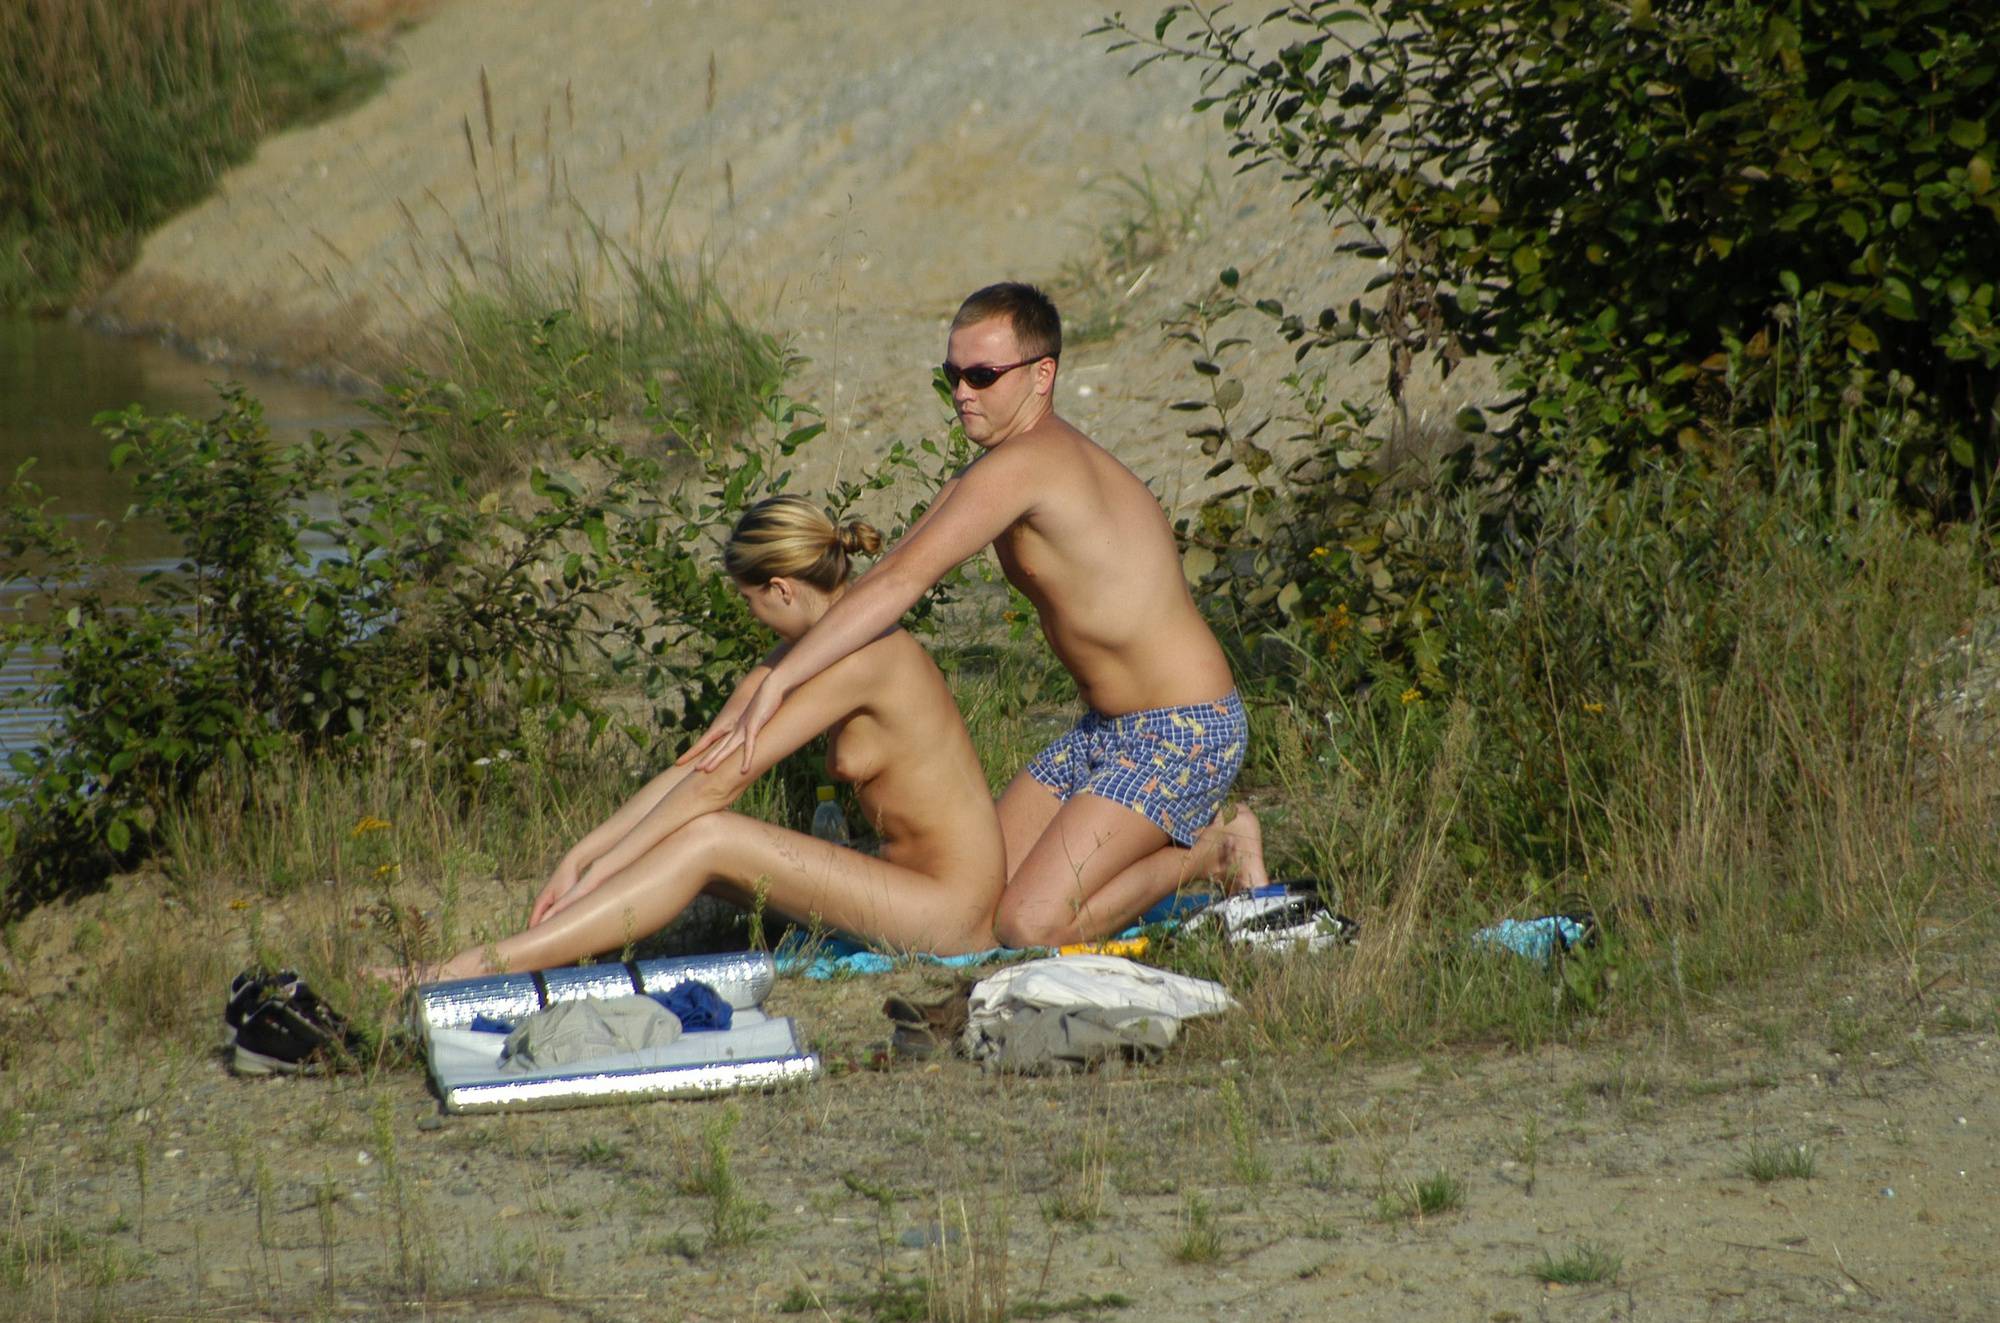 Photo Shoot Observation Pure Nudism Family - 1